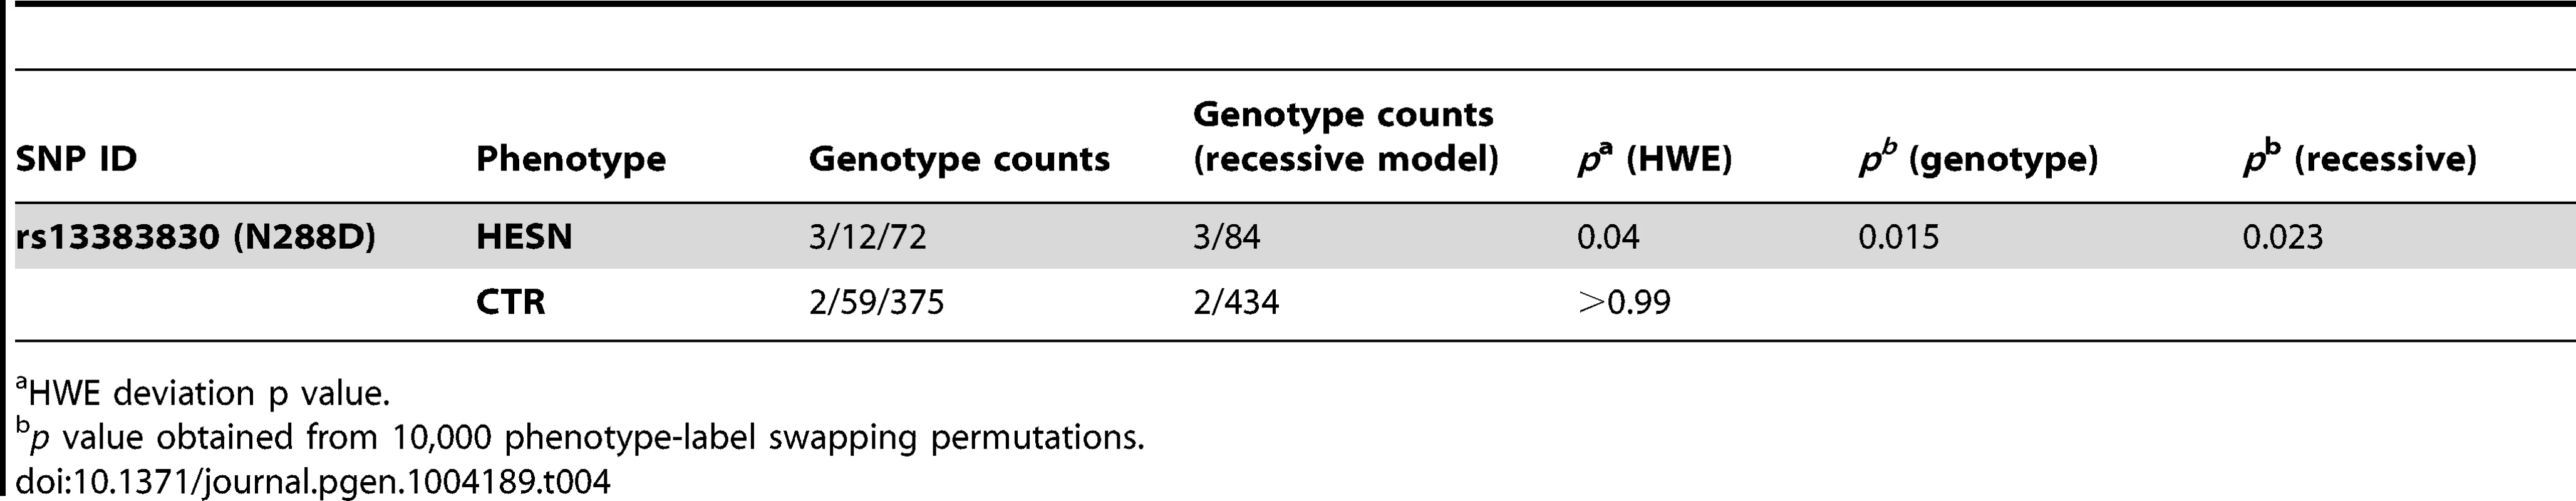 Genotype counts, HWE proportions and association analysis for rs13383830.